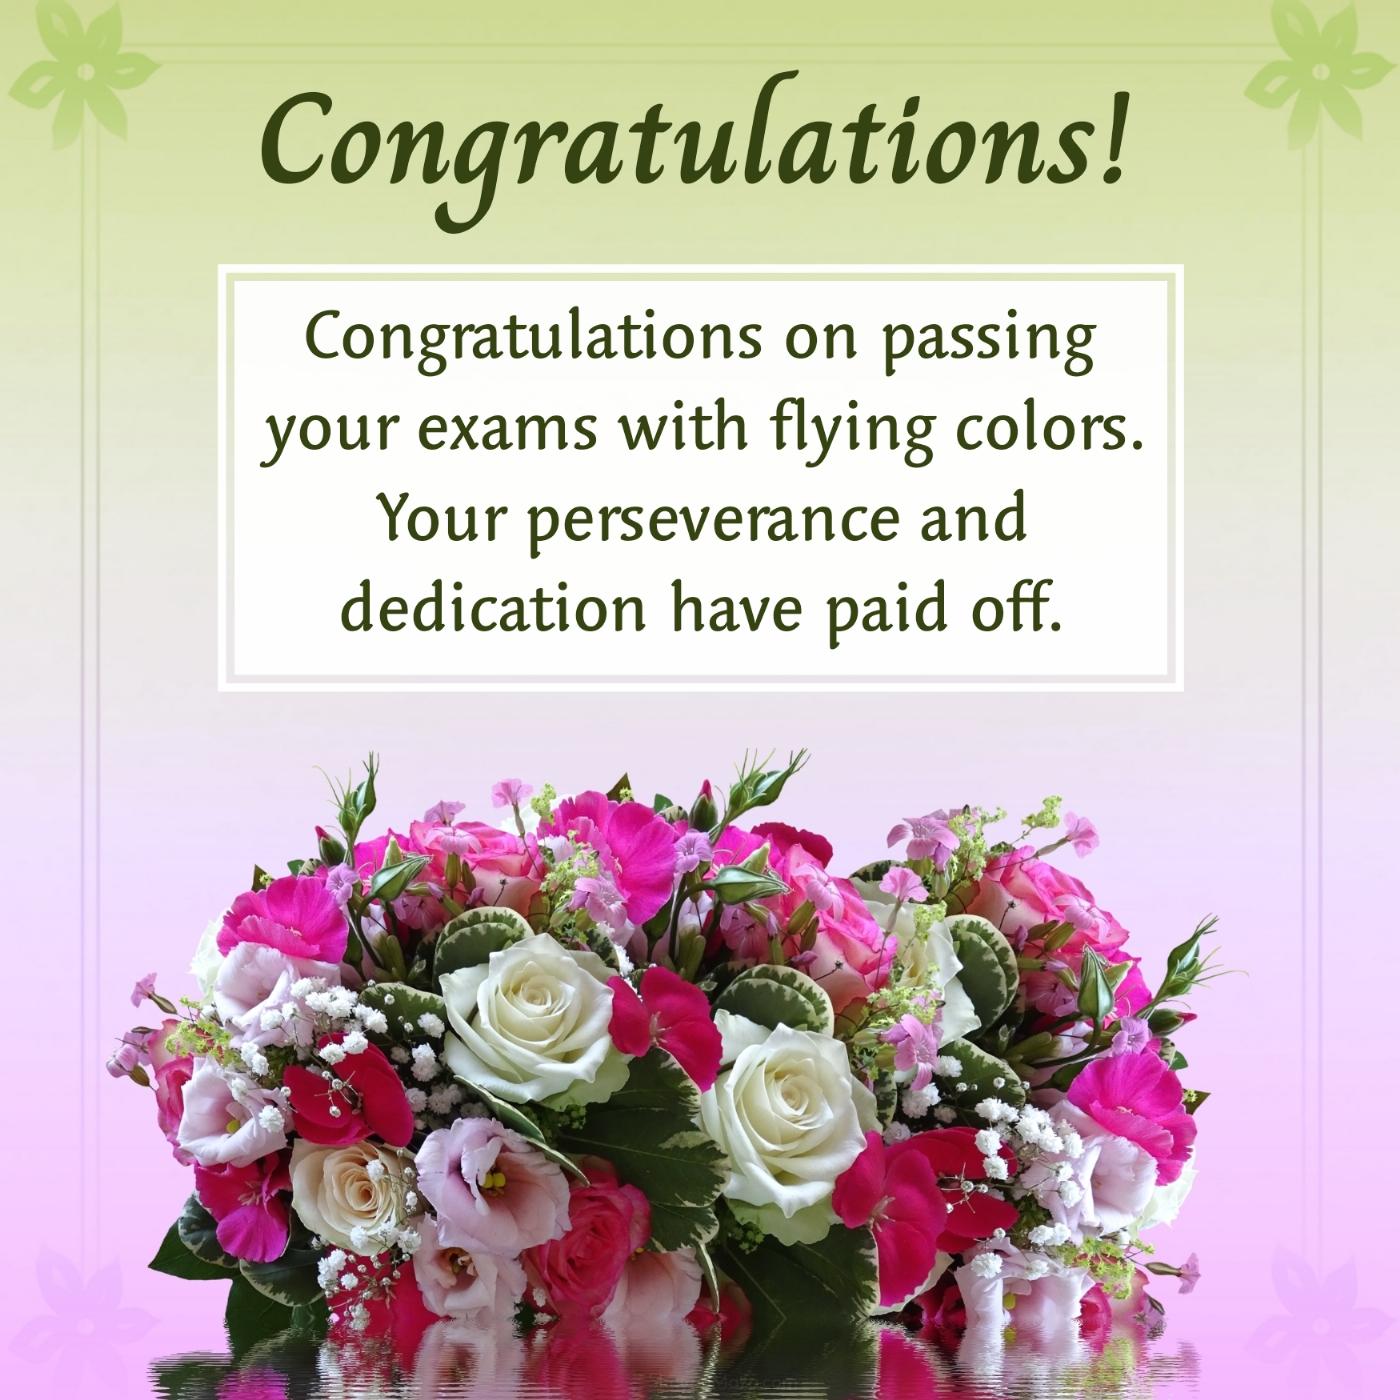 Congratulations on passing your exams with flying colors